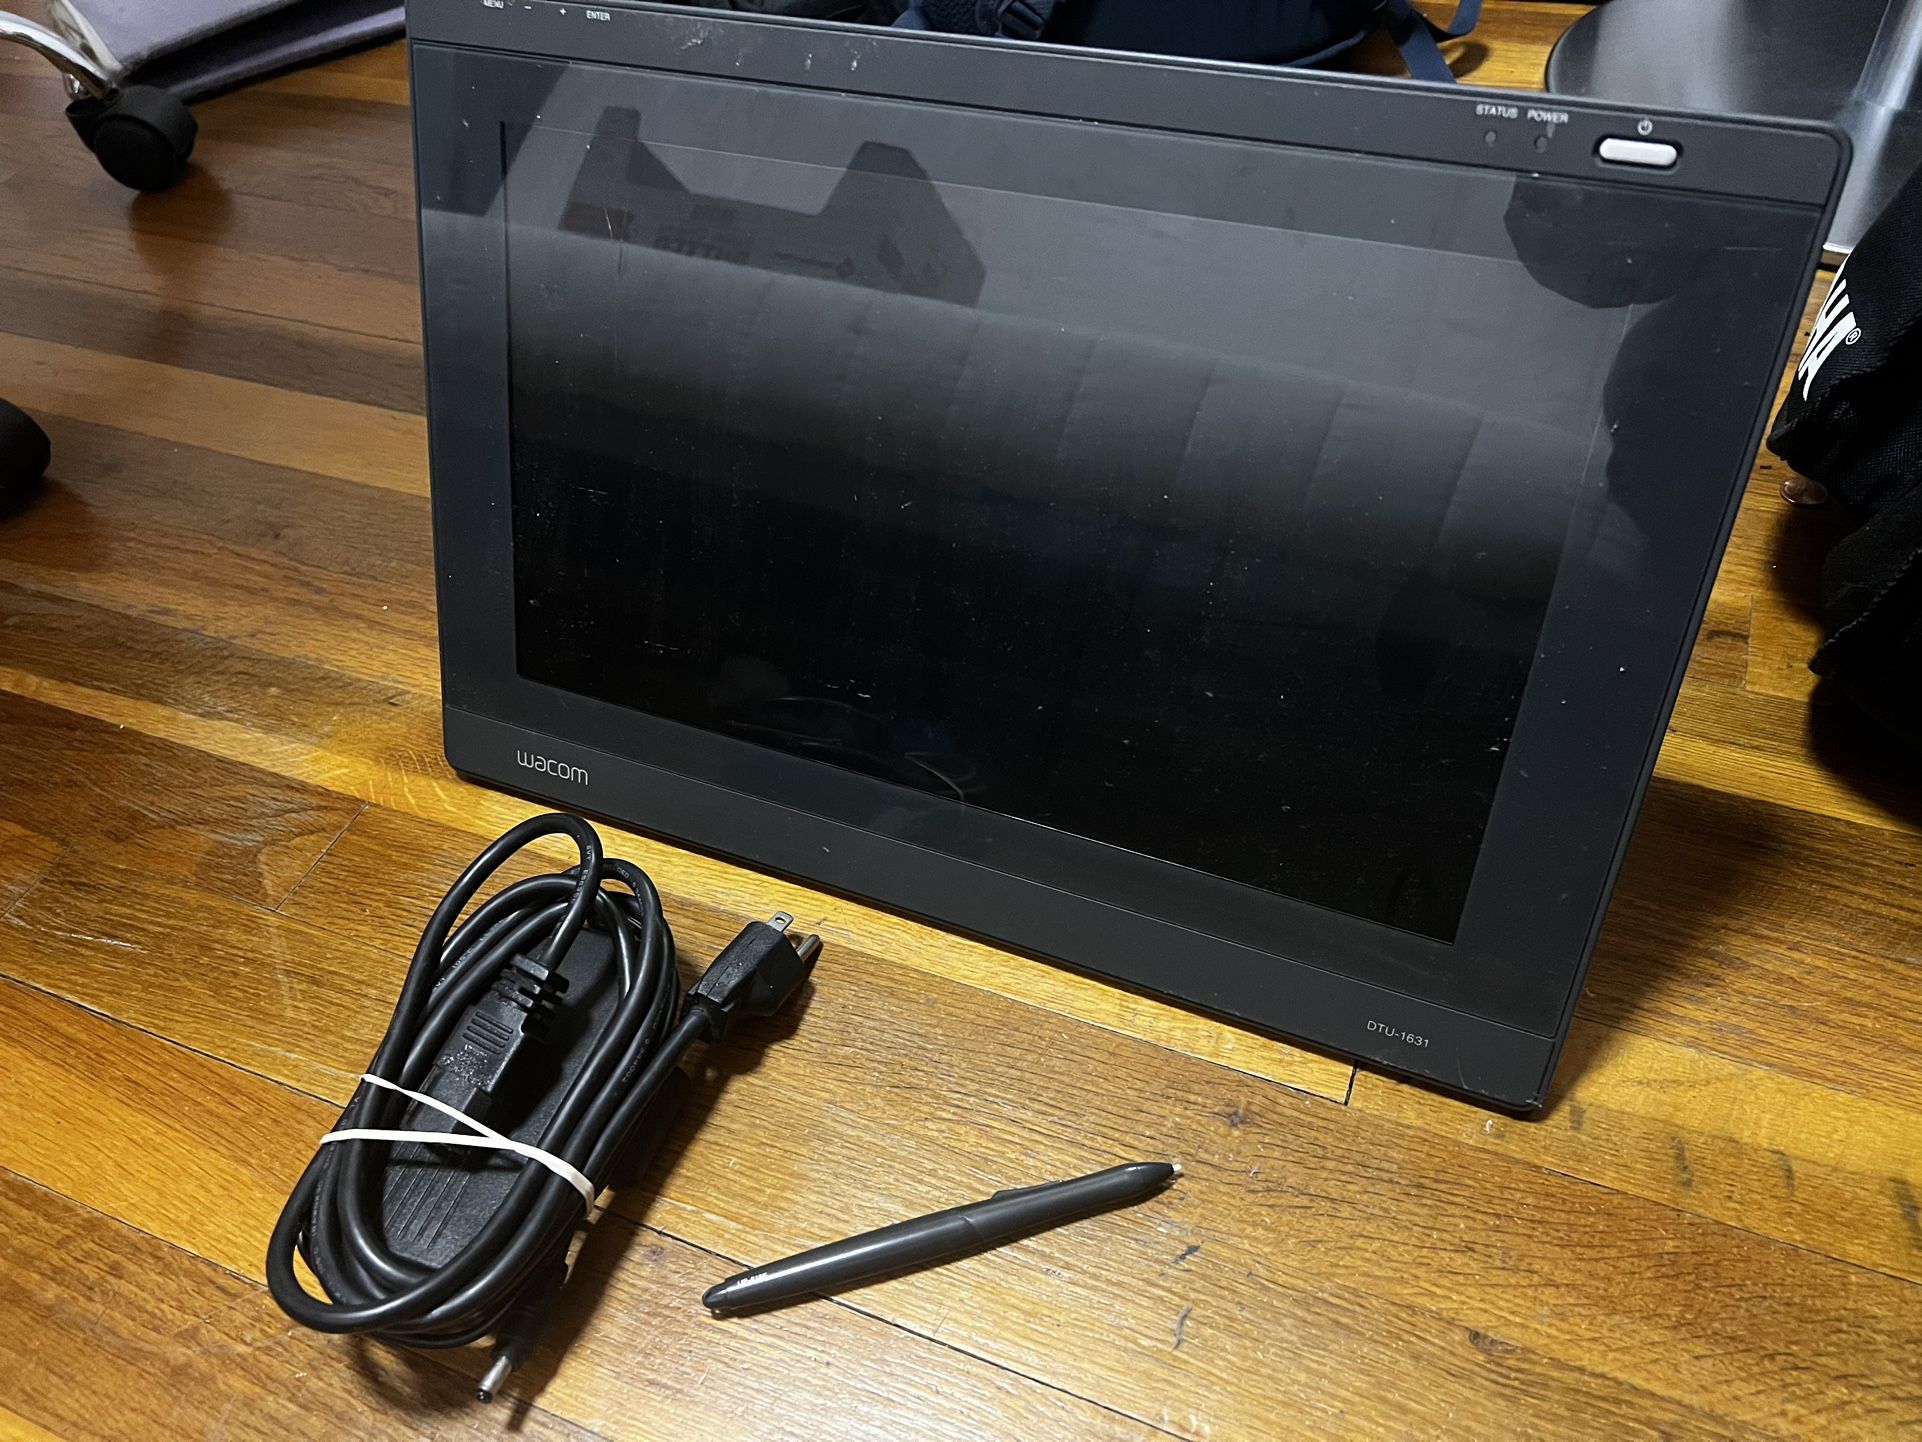 Wacom LCD Tablet With Pen